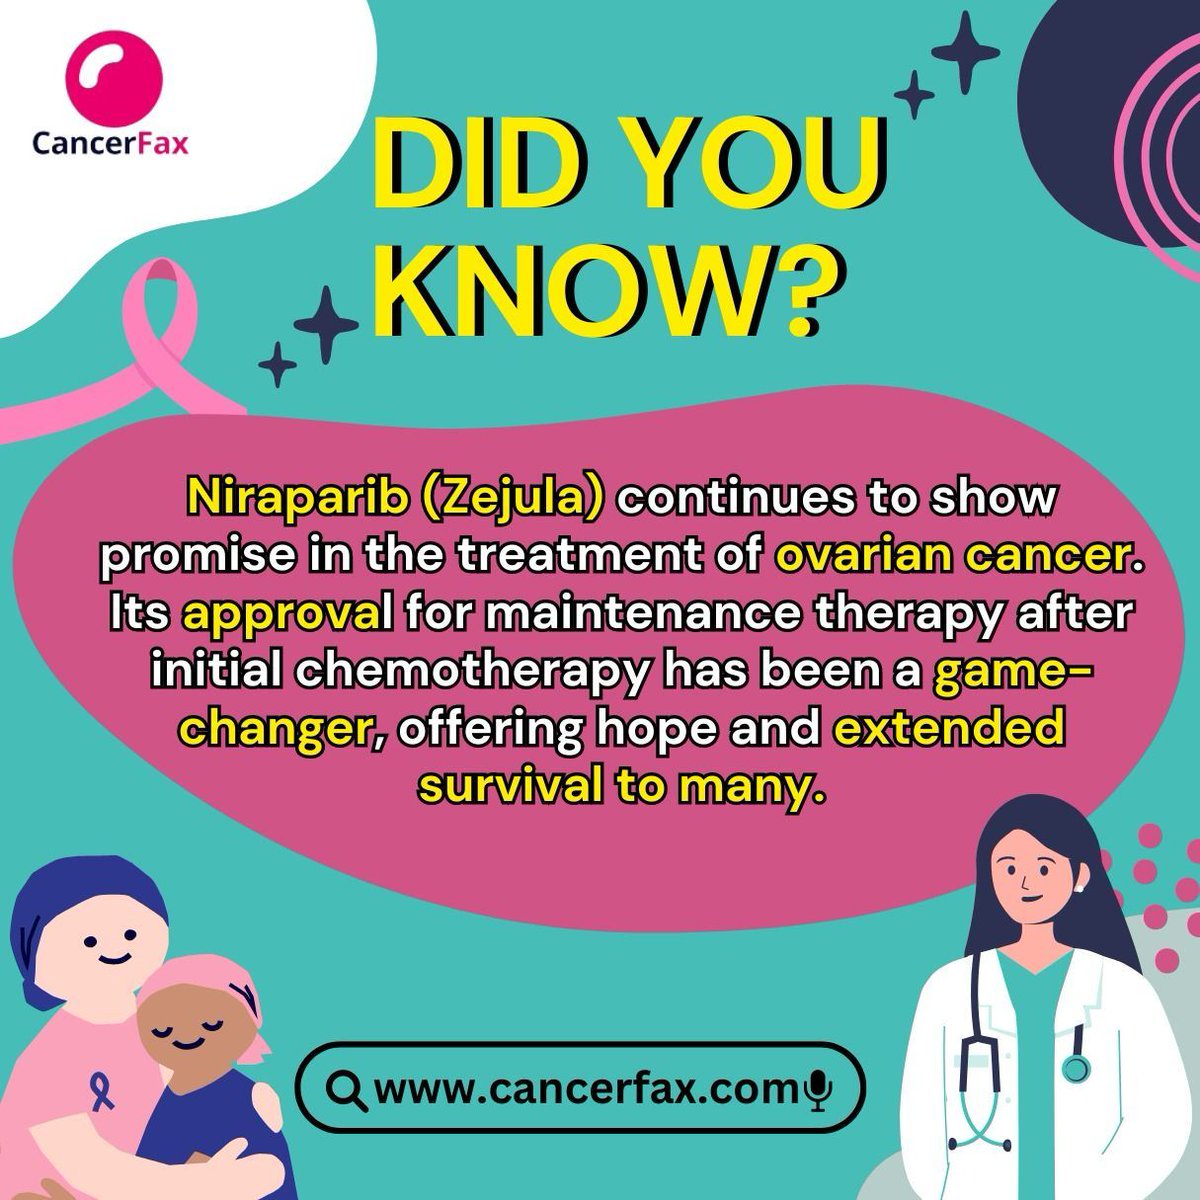 Niraparib, branded as Zejula, has recently gained approval for the treatment of ovarian cancer. This development opens up possibilities for improved outcomes and quality of life for those affected by ovarian cancer. #PrecisionMedicine #OvarianCancerAwareness #cancerfax